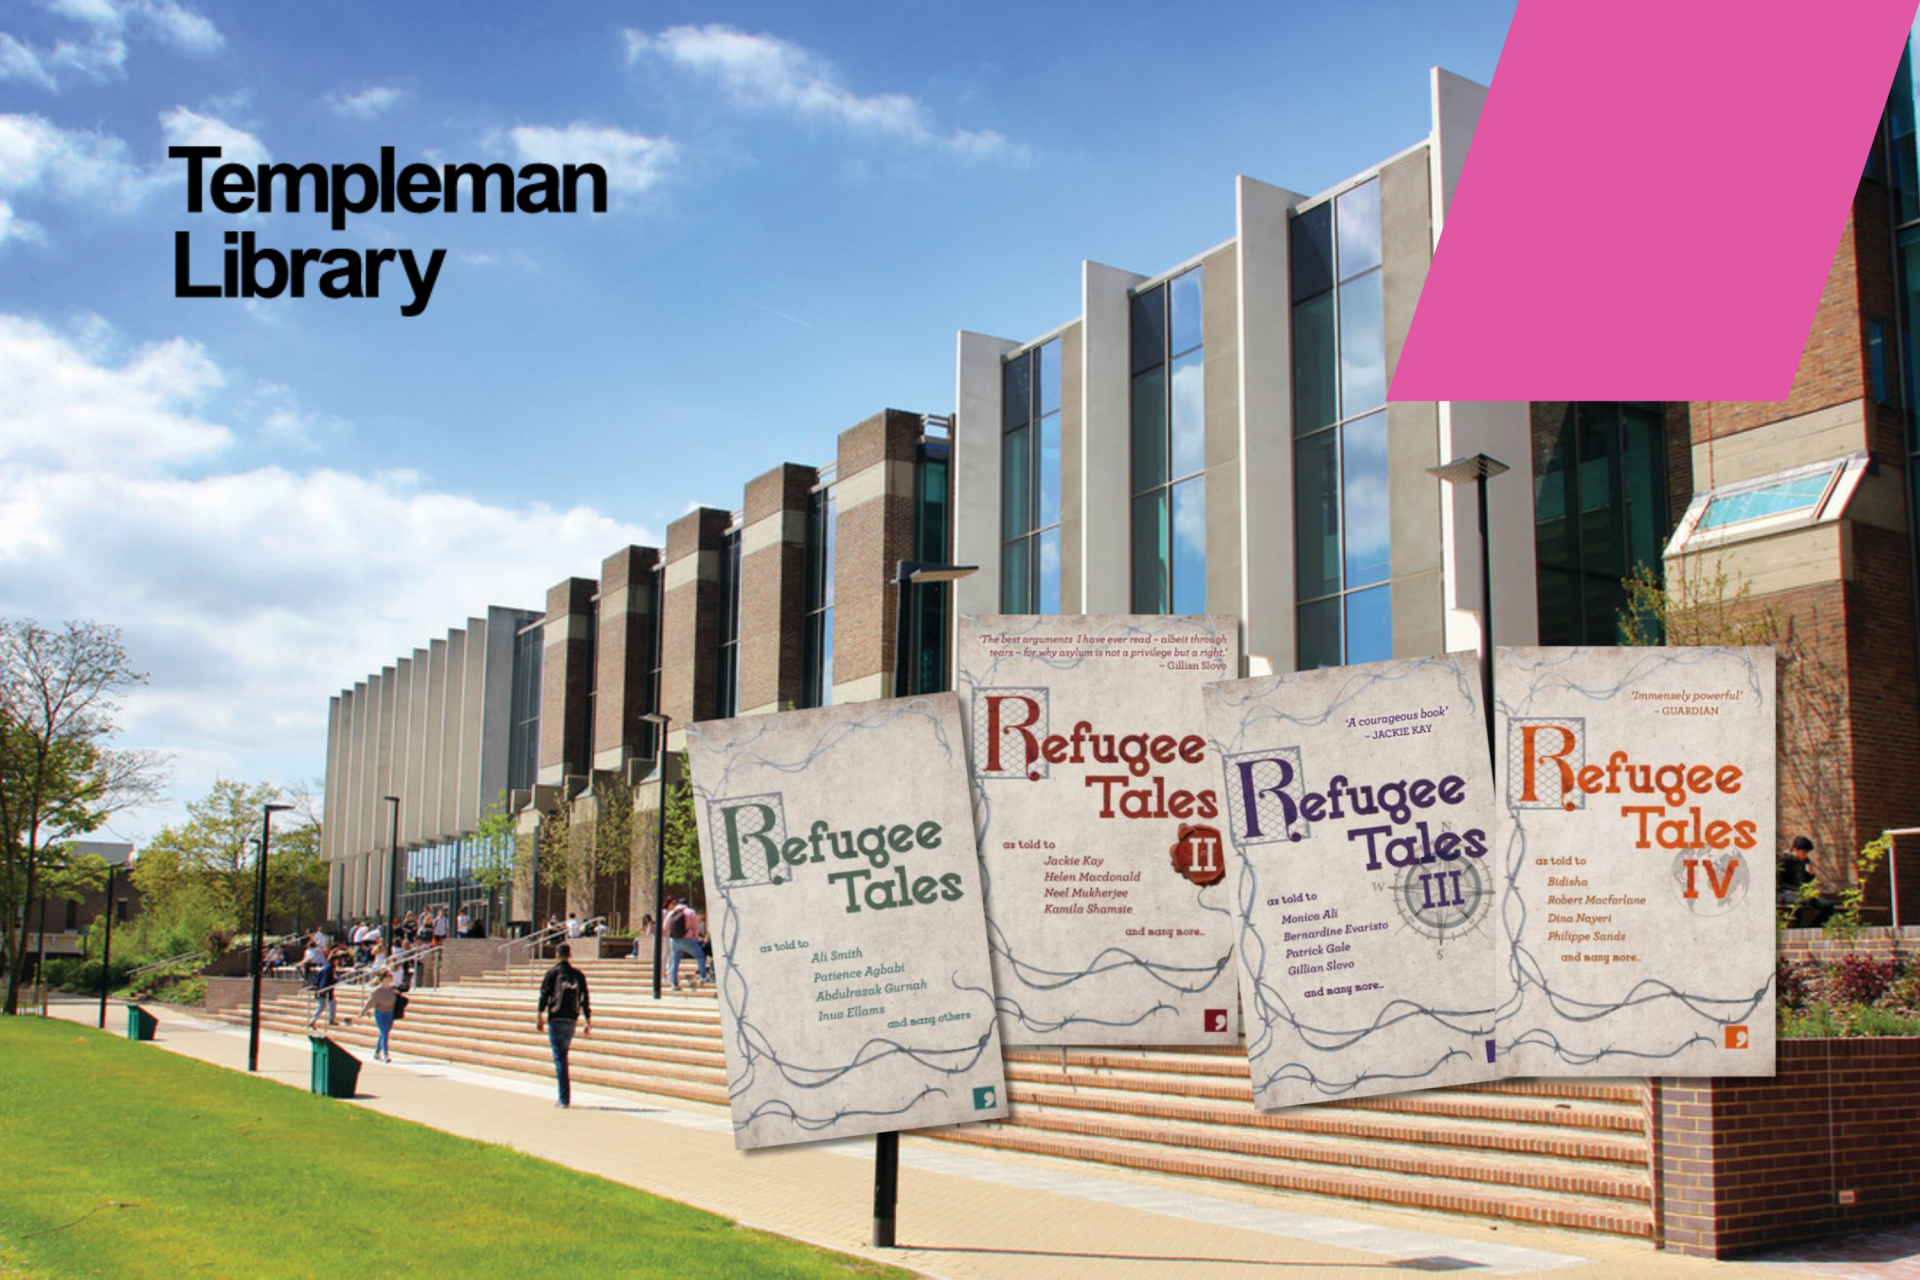 Composite image of Templeman Library overlaid with covers of volumes 1-4 of the Refugee Tales books. Templeman Library logo.